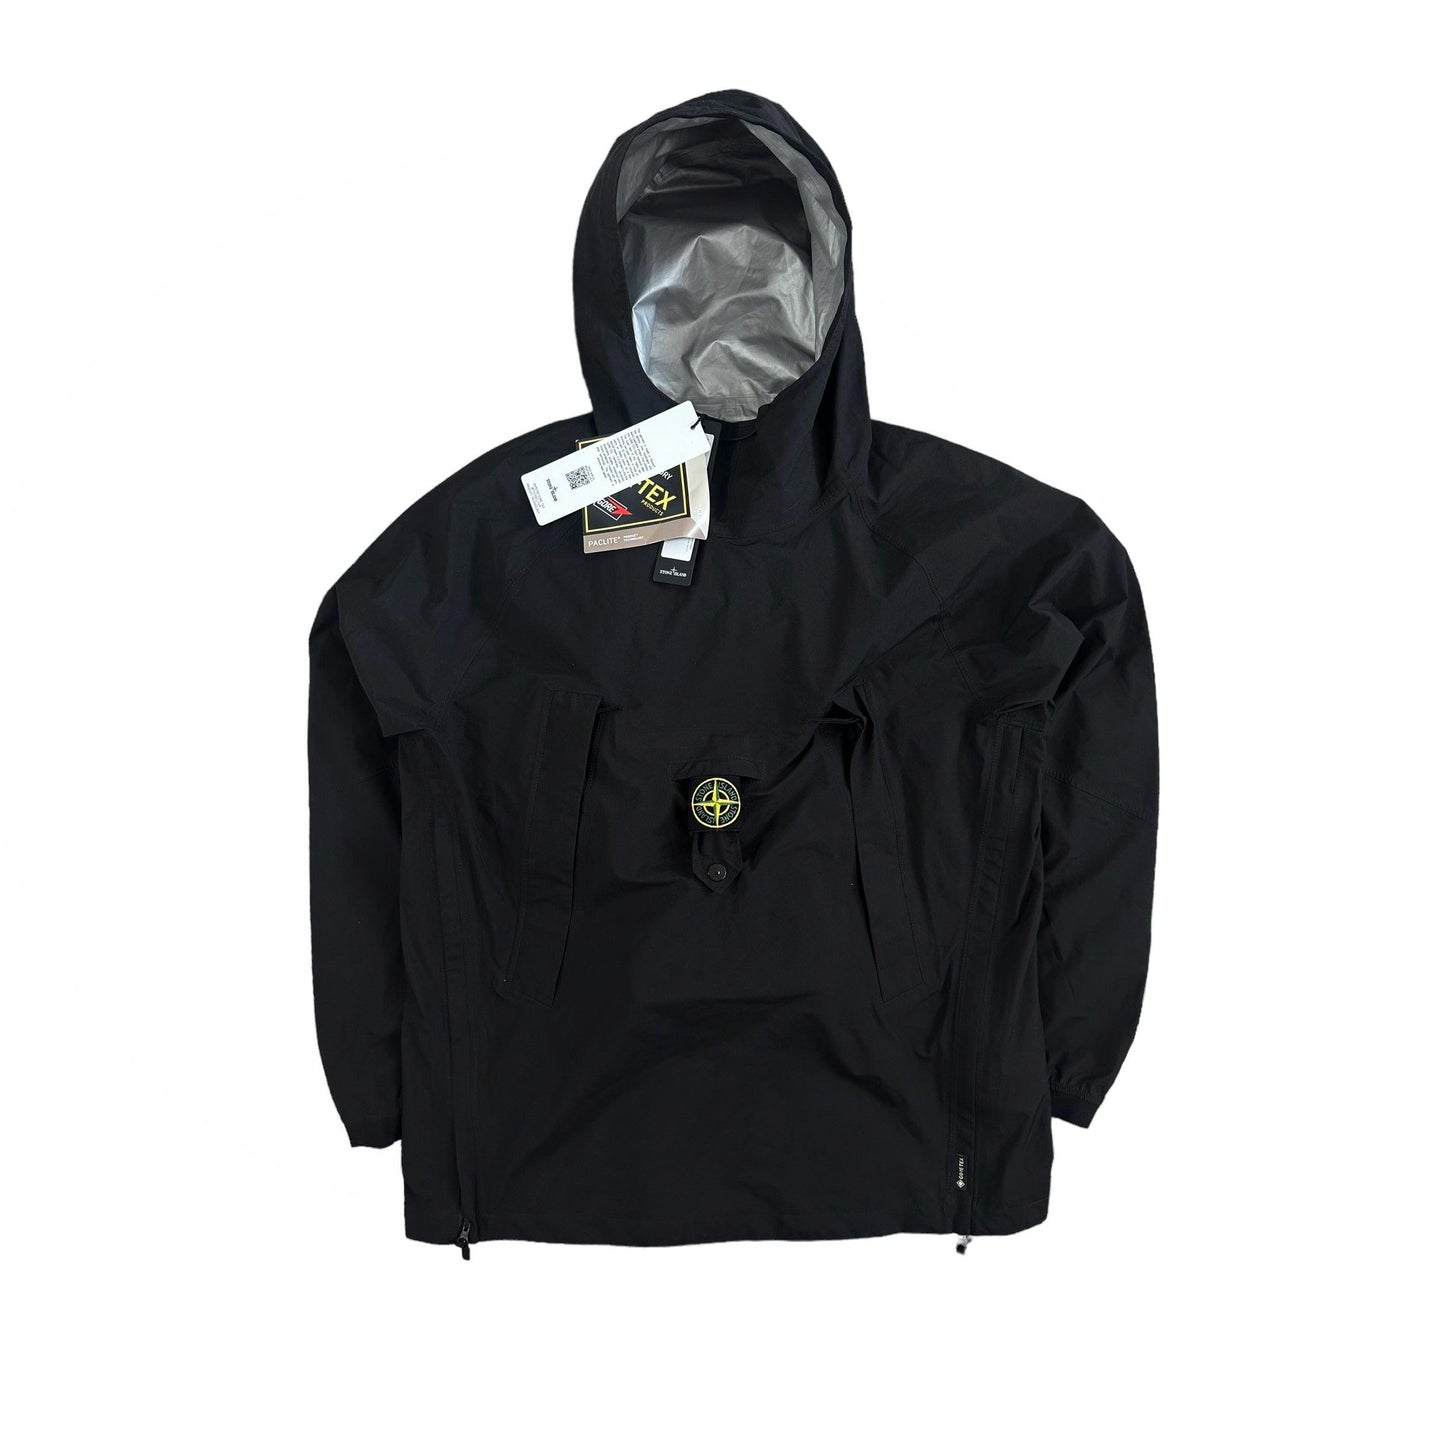 Stone Island 3 in 1 Anorak Goretex Jacket with Bag & Gilet - Known Source